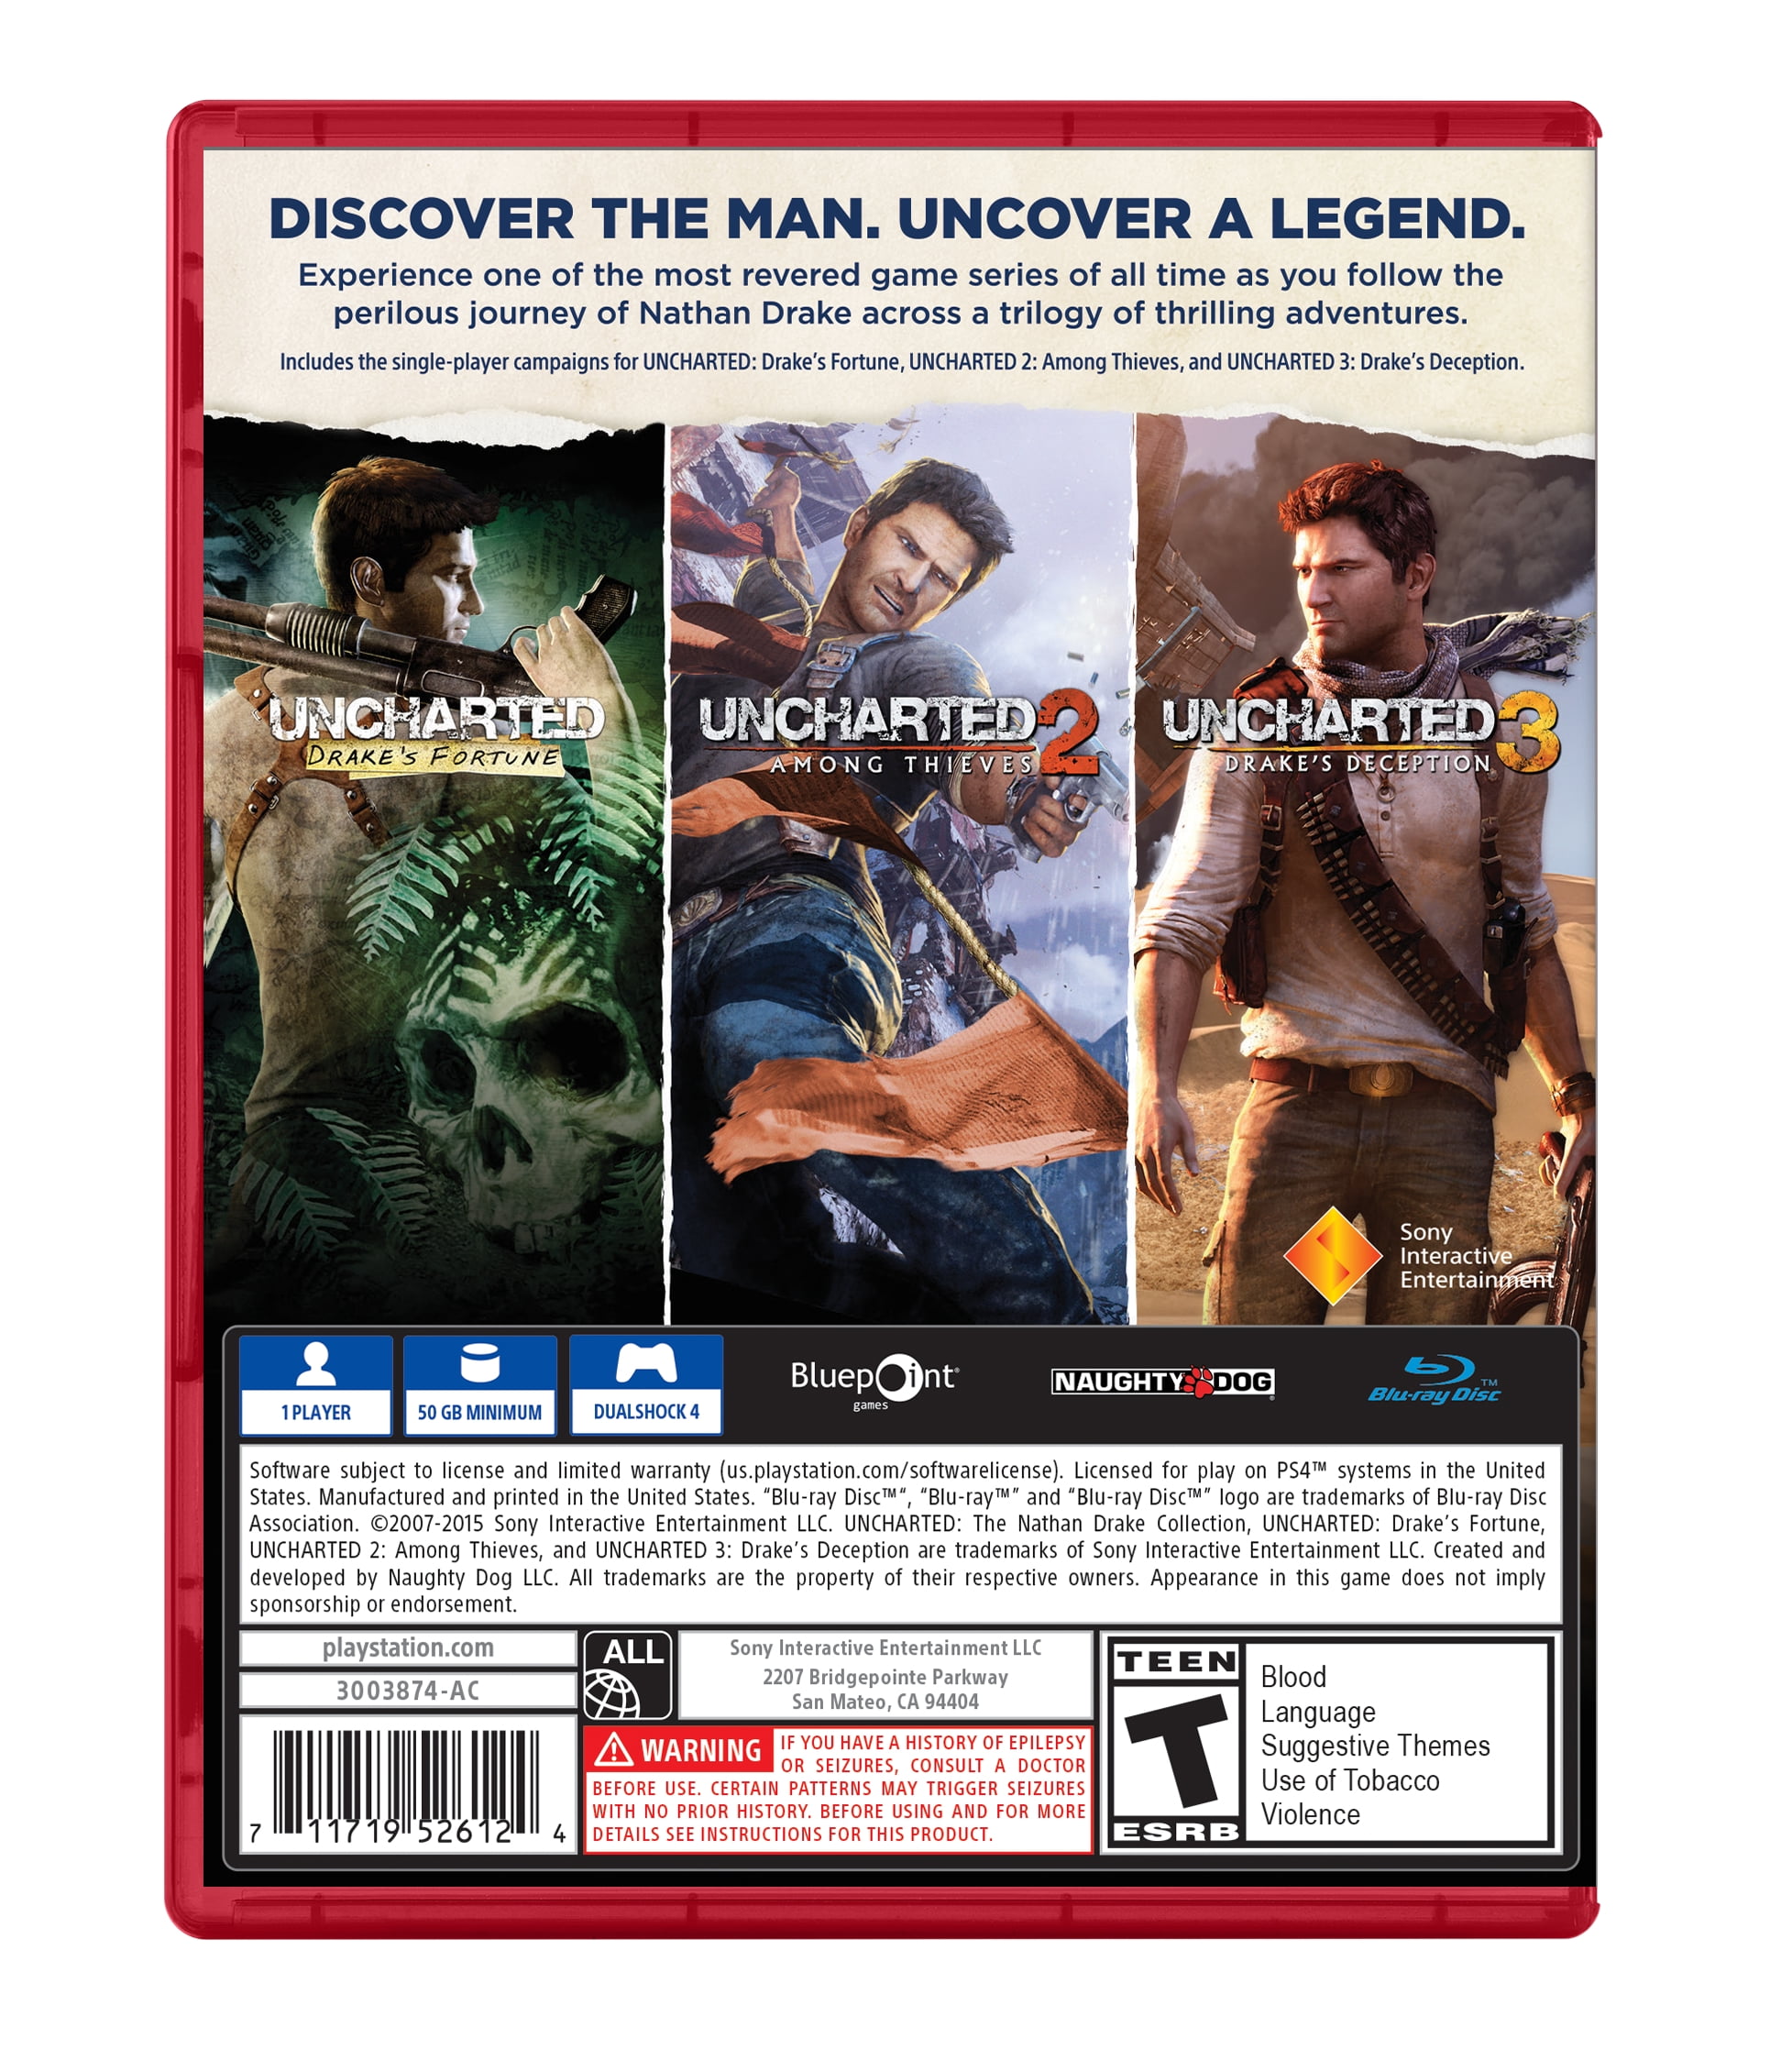 Uncharted: The Nathan Drake Collection - PlayStation 4 